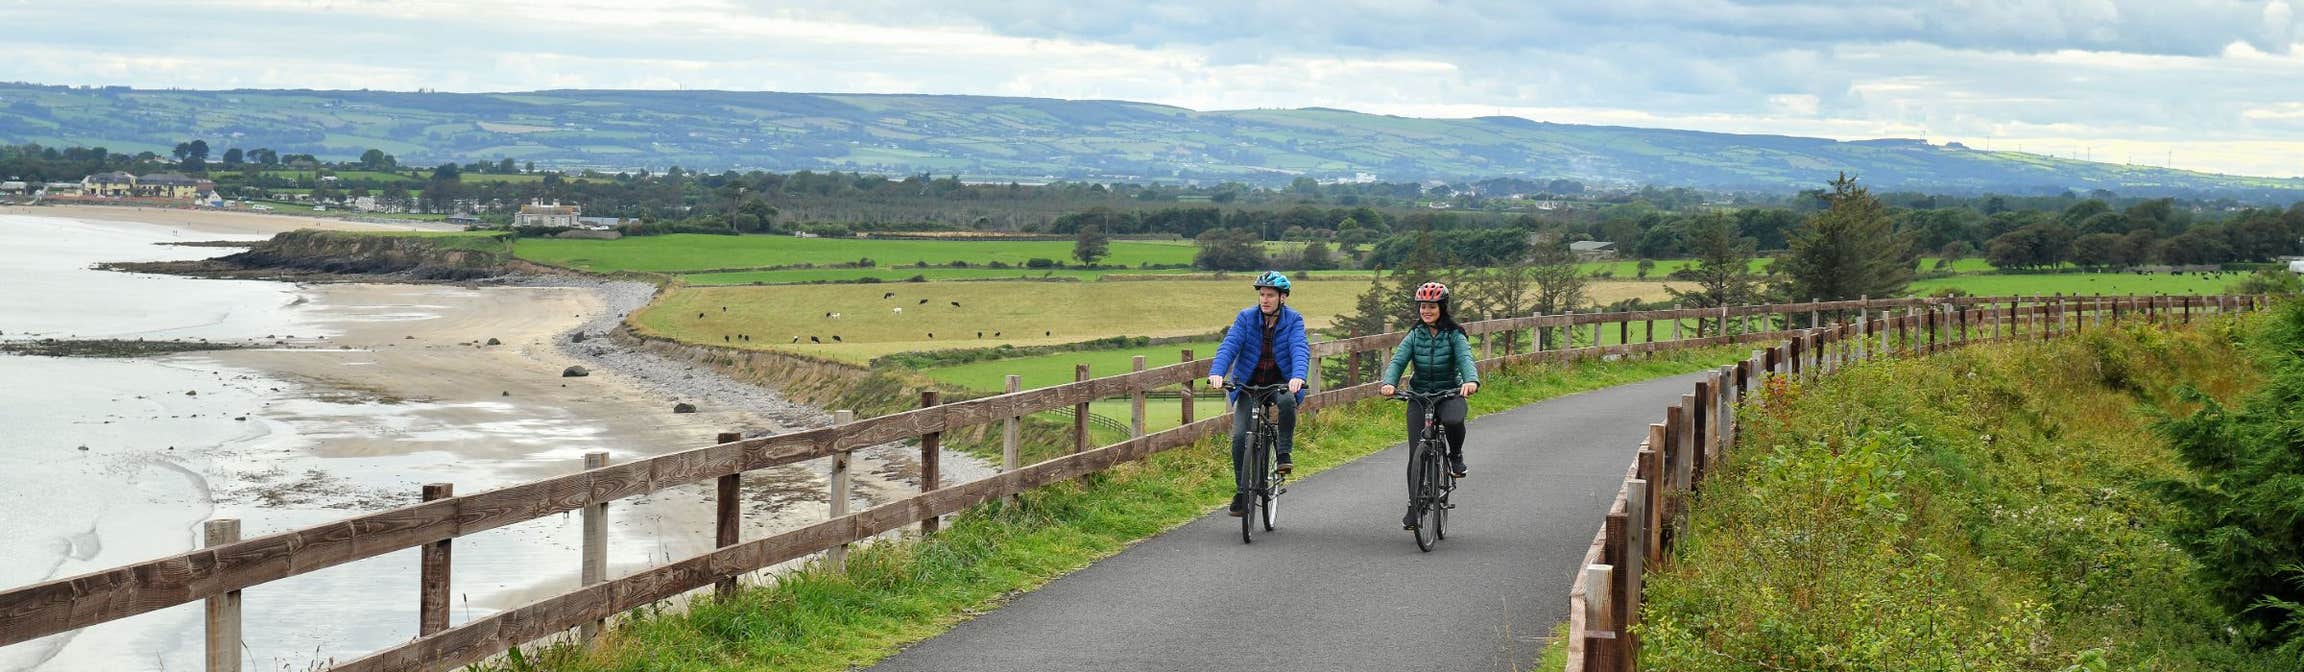 Image of cyclists on the Dungarvan-Waterford Greenway